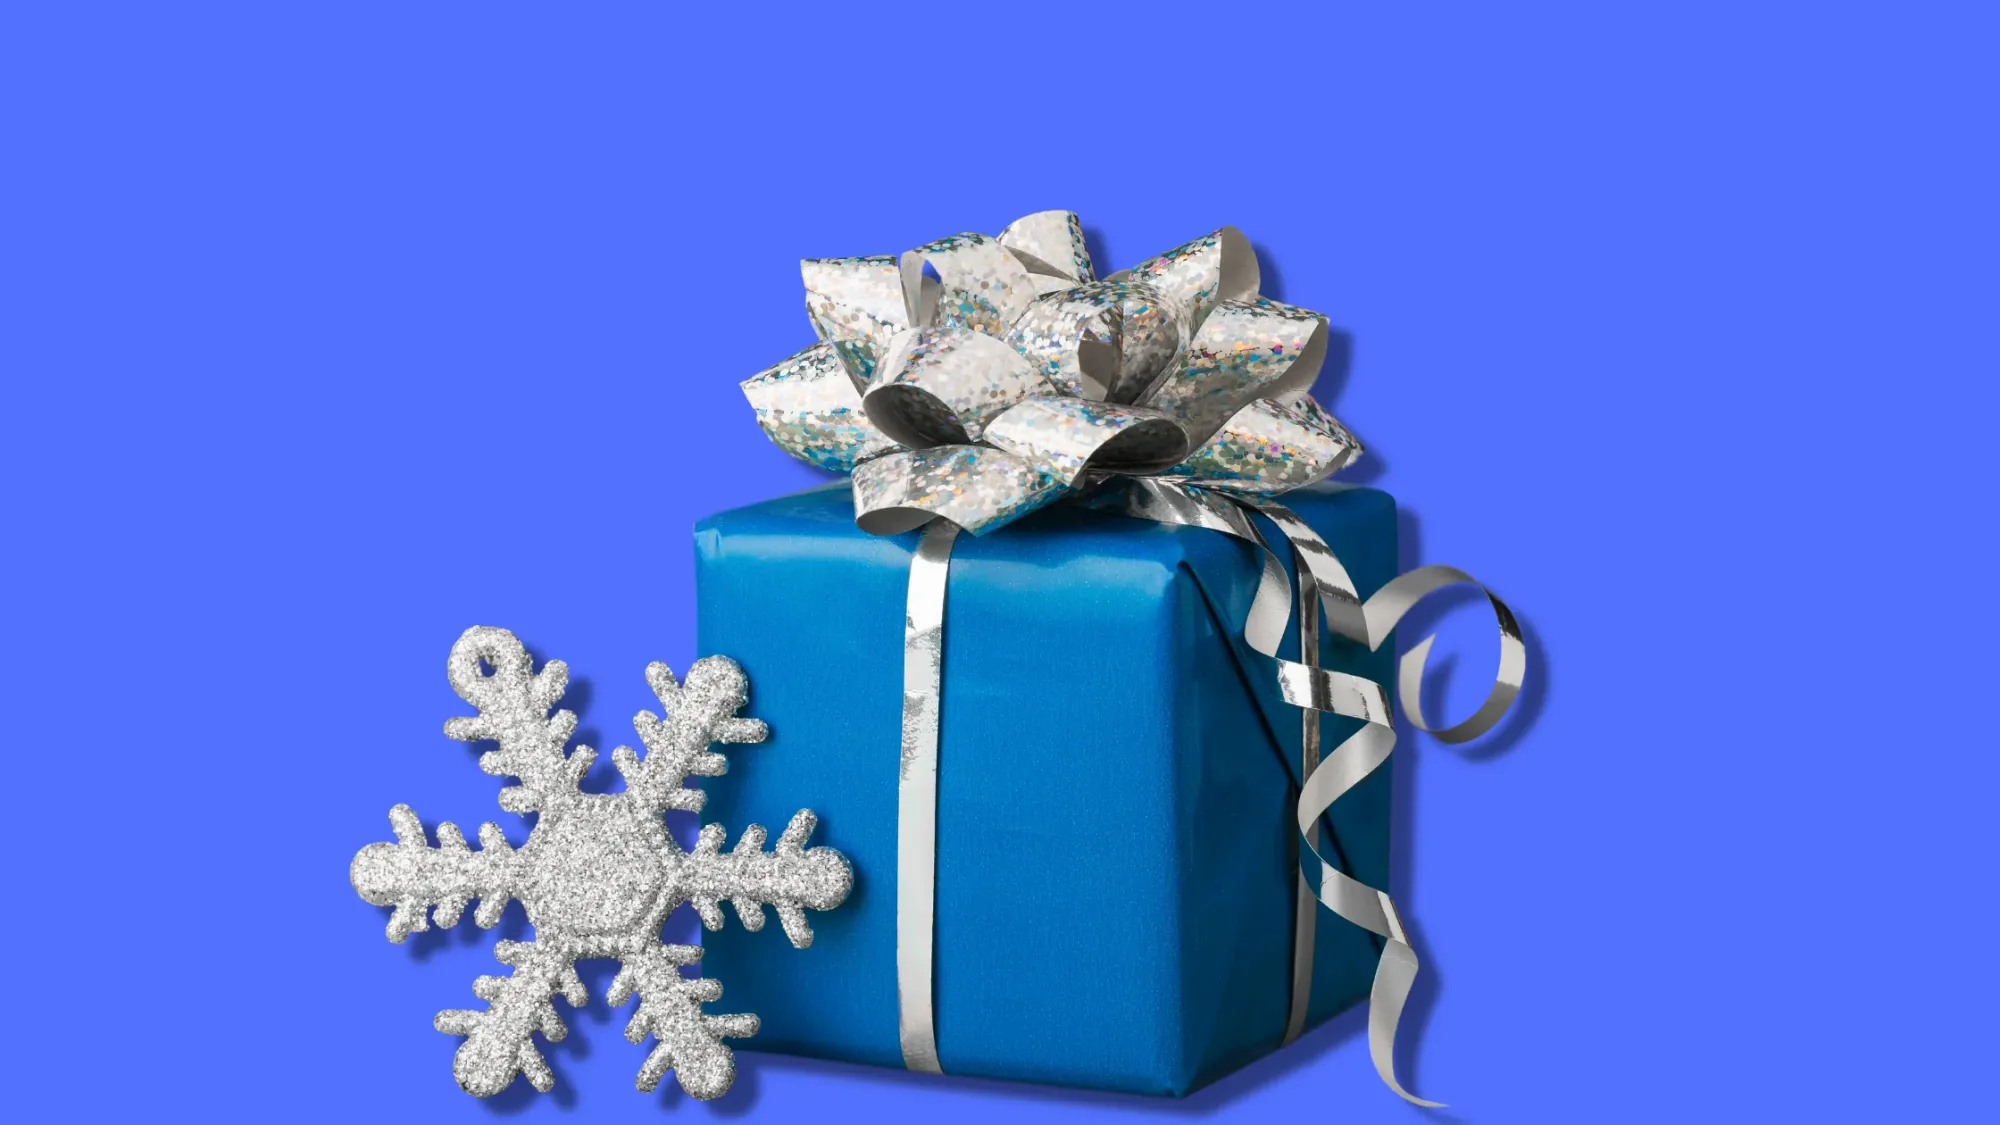 https://blog.empuls.io/content/images/2022/12/Christmas-Gifts-for-Bosses---Managers.webp